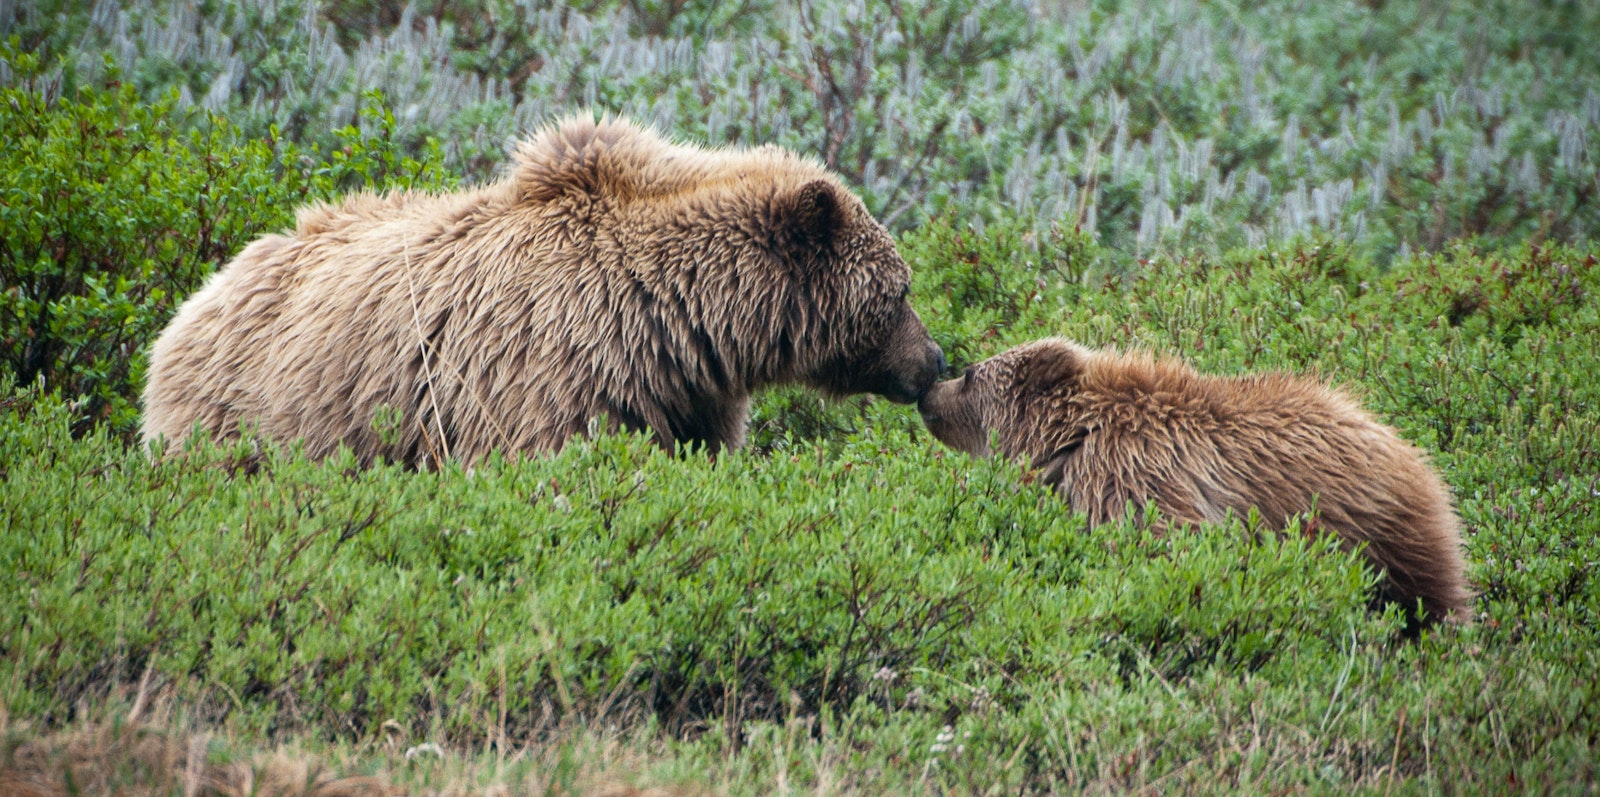 A grown grizzly bear and a cub touch noses in a lush green landscape